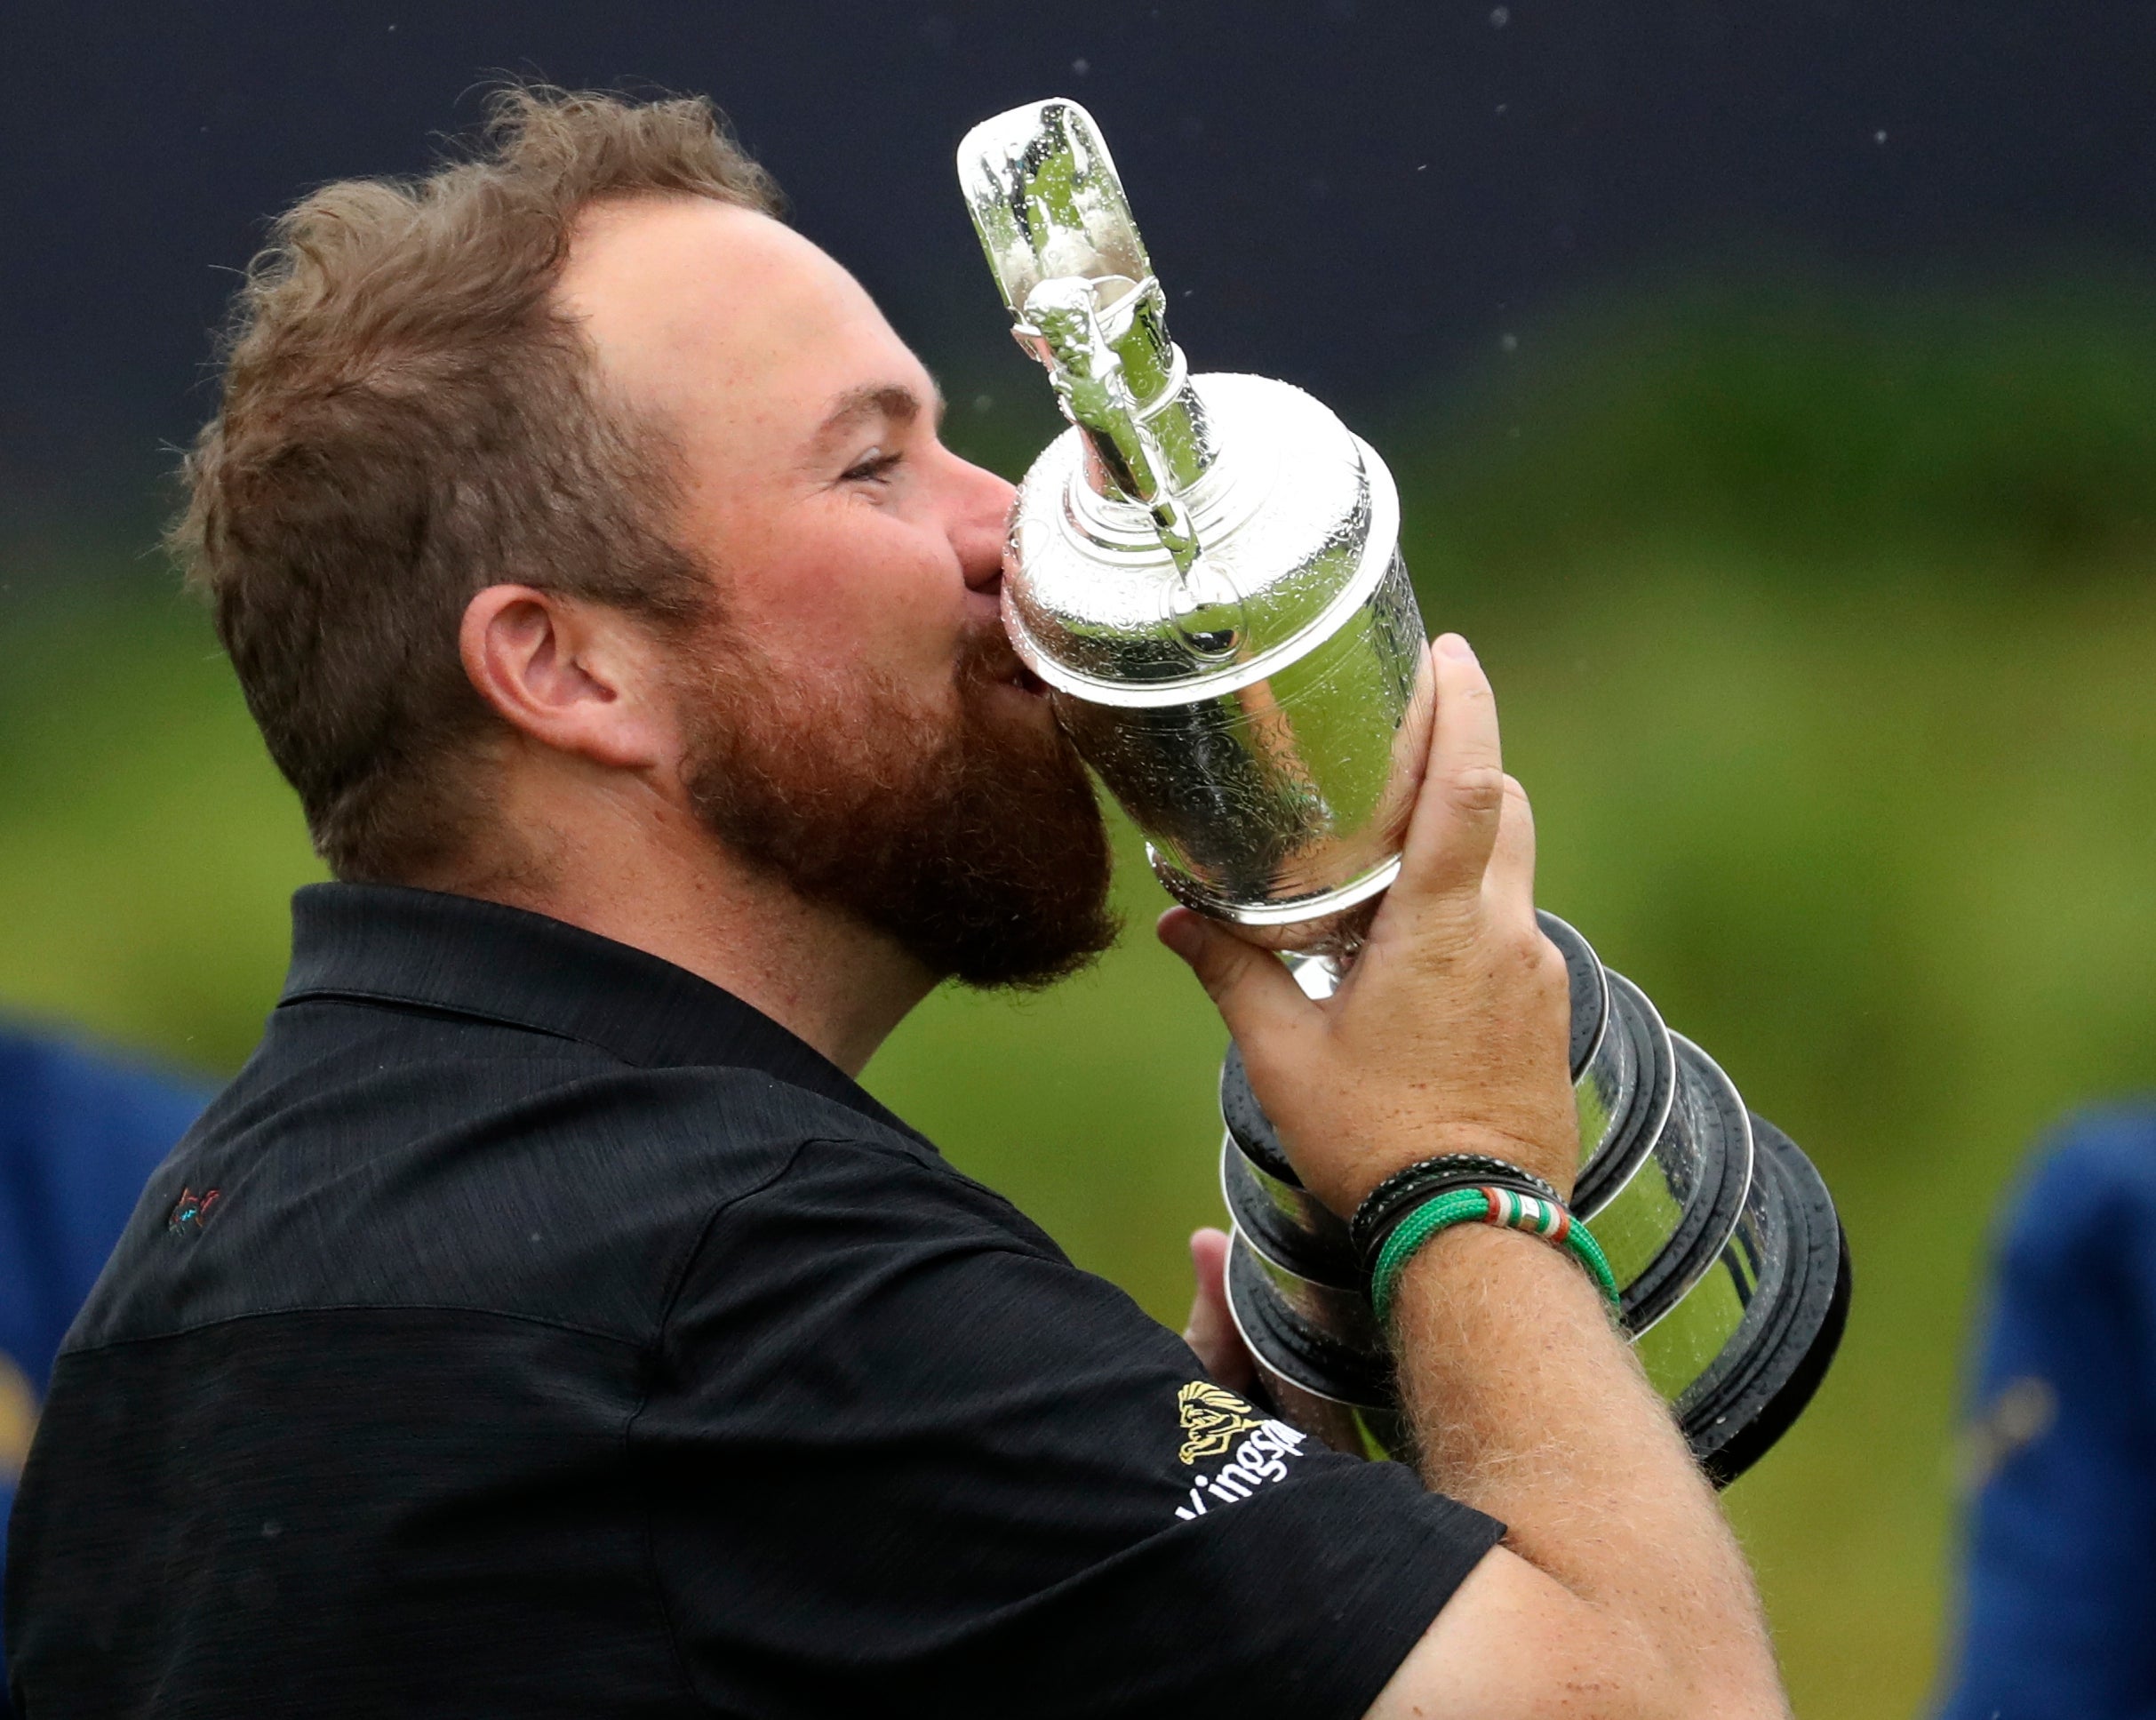 Shane Lowry will keep the Claret Jug on the kitchen table